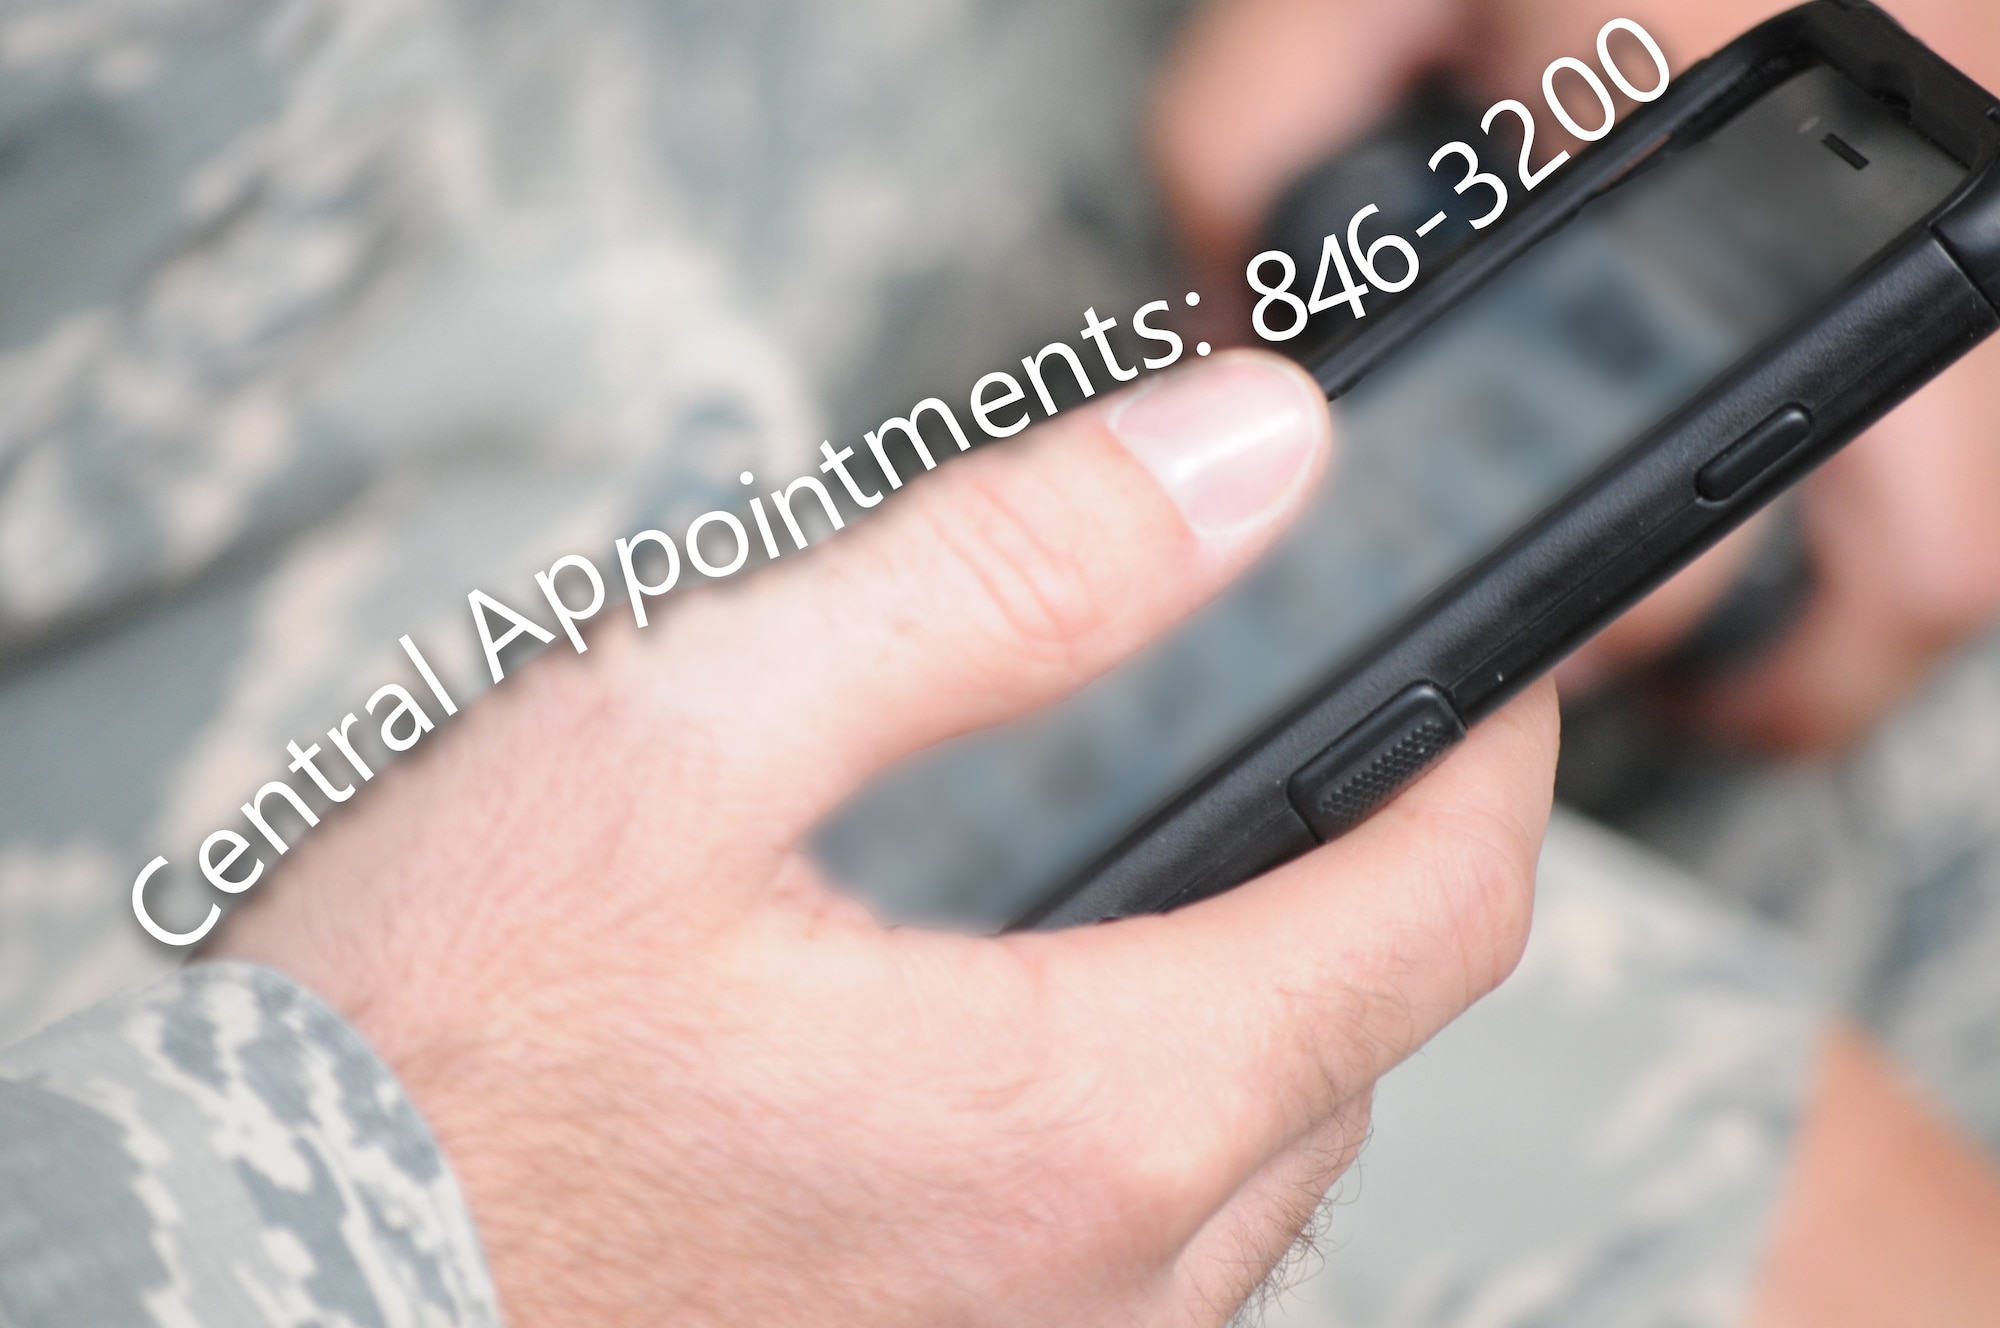 The 377th Medical Group's appointment line is the first contact patients have with the clinic. They handle about 3,500 calls per month. (U.S. Air Force graphic by Senior Airman Eli Chevalier)